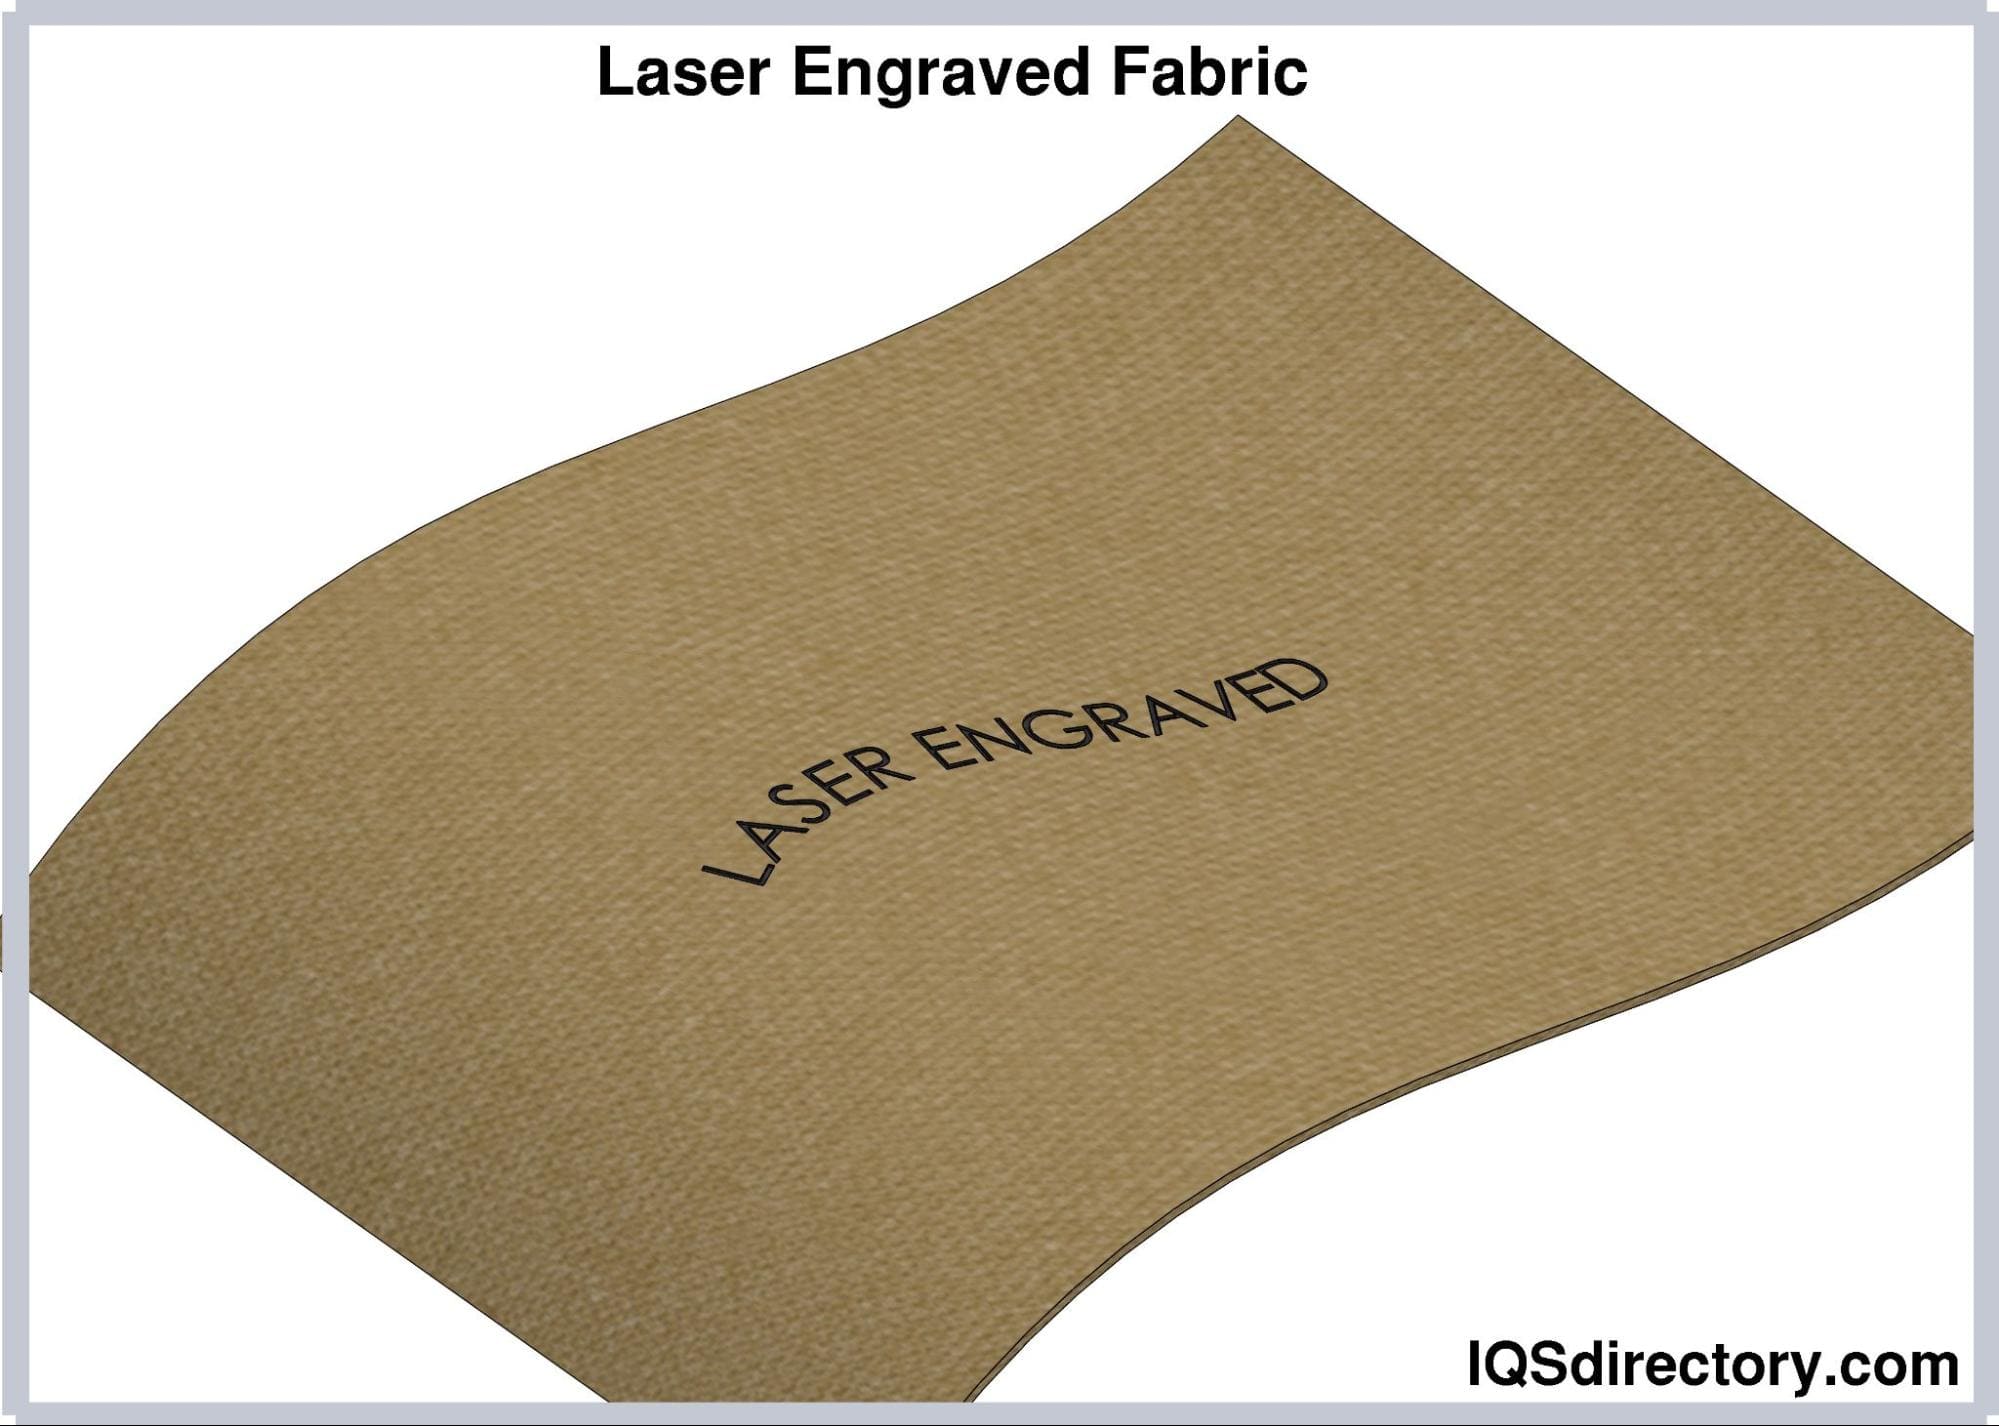 Laser Engraved Fabric